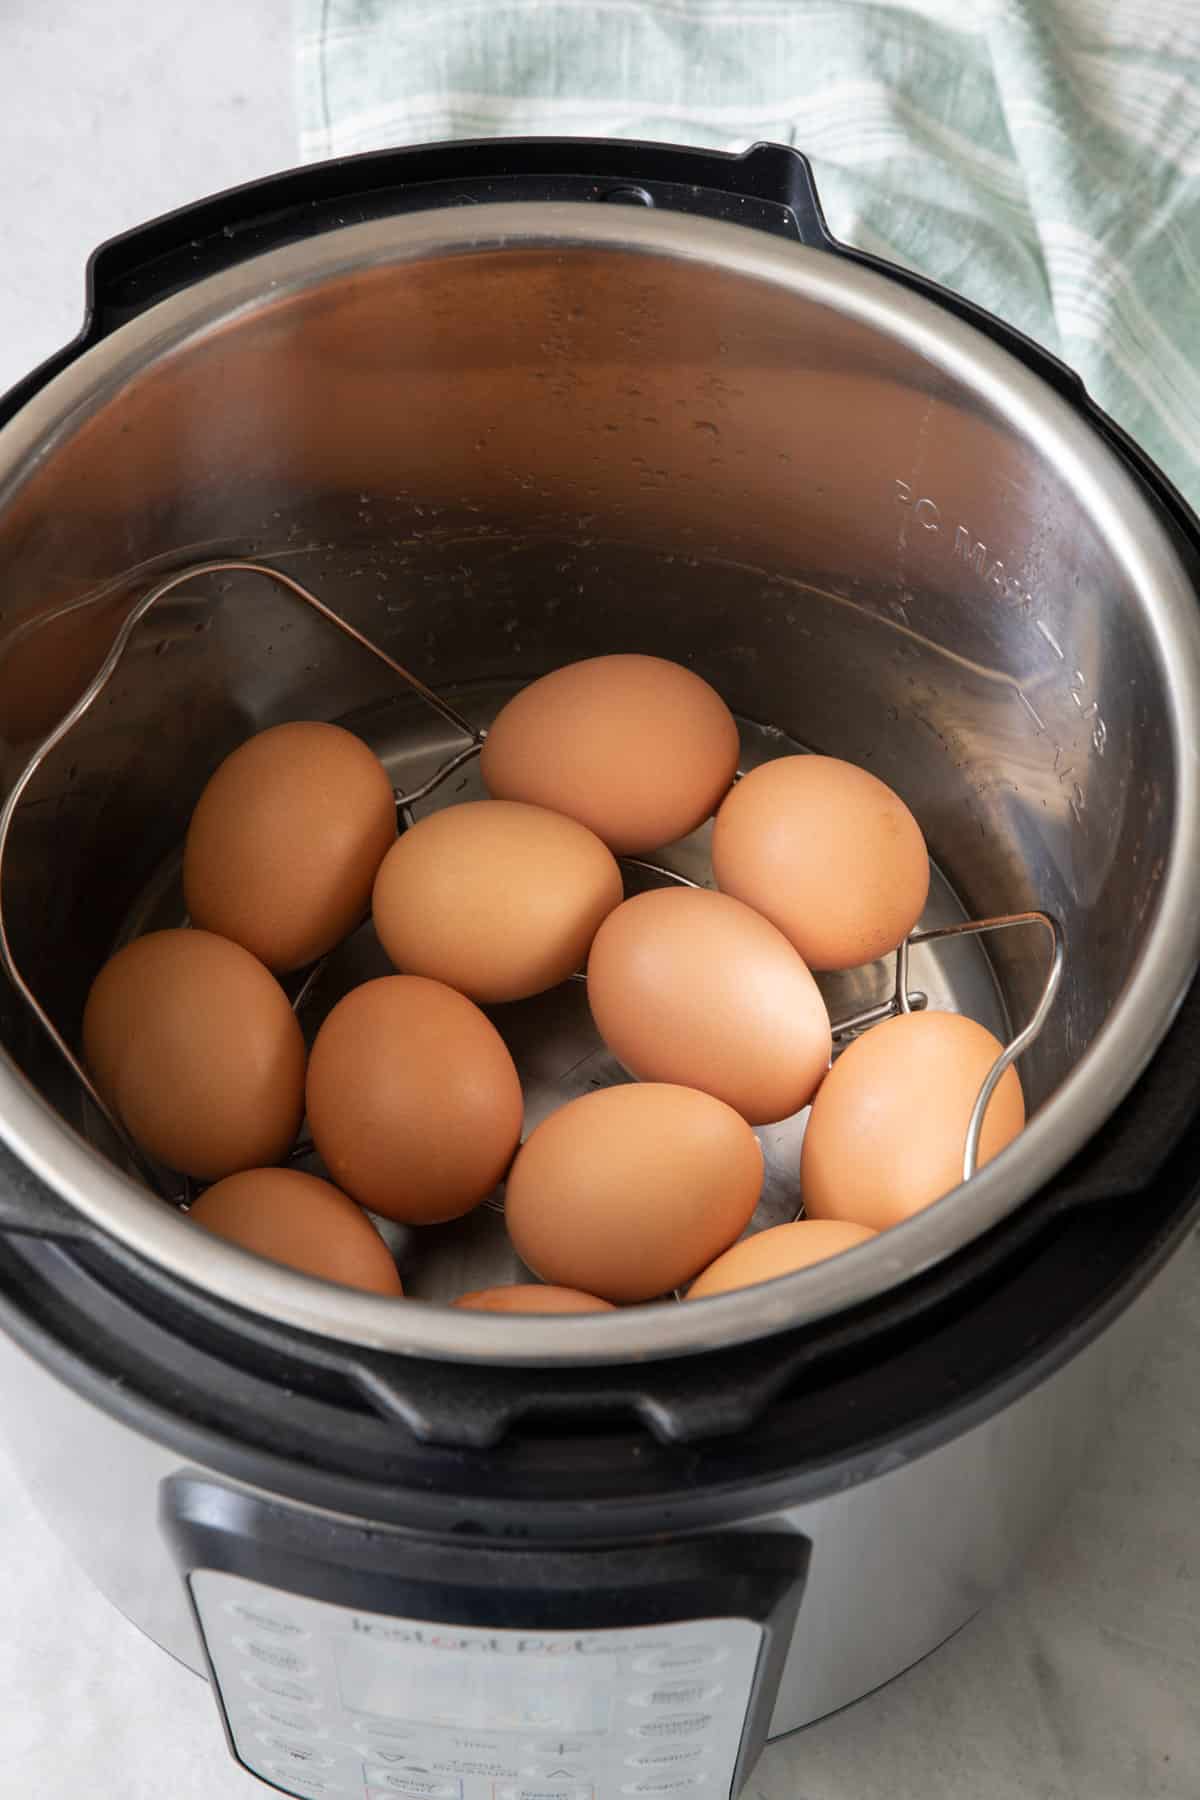 https://feelgoodfoodie.net/wp-content/uploads/2022/09/Instant-Pot-Hard-Boiled-Eggs-04.jpg